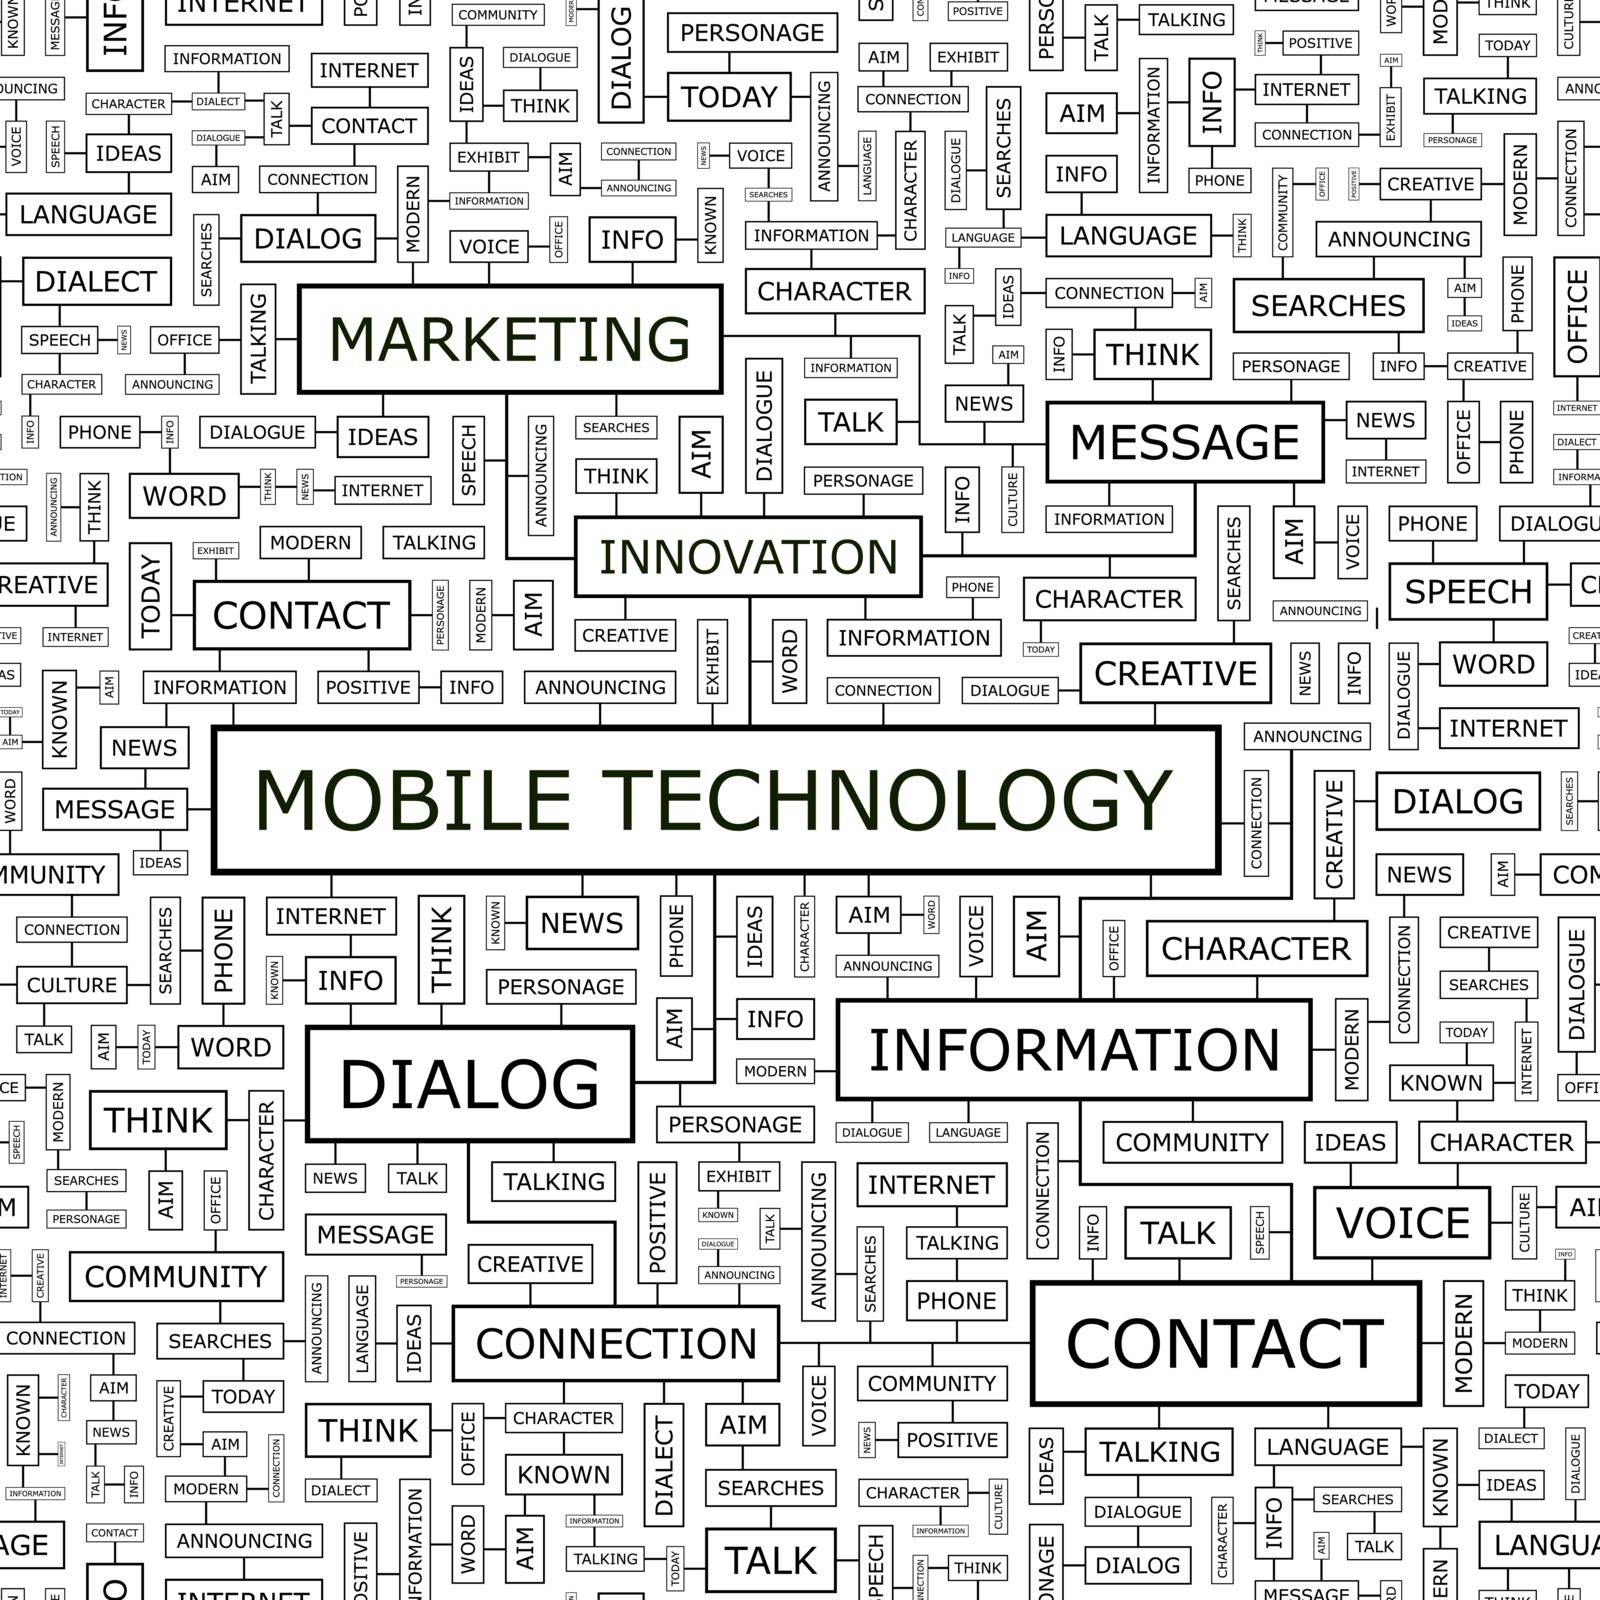 MOBILE TECHNOLOGY by login